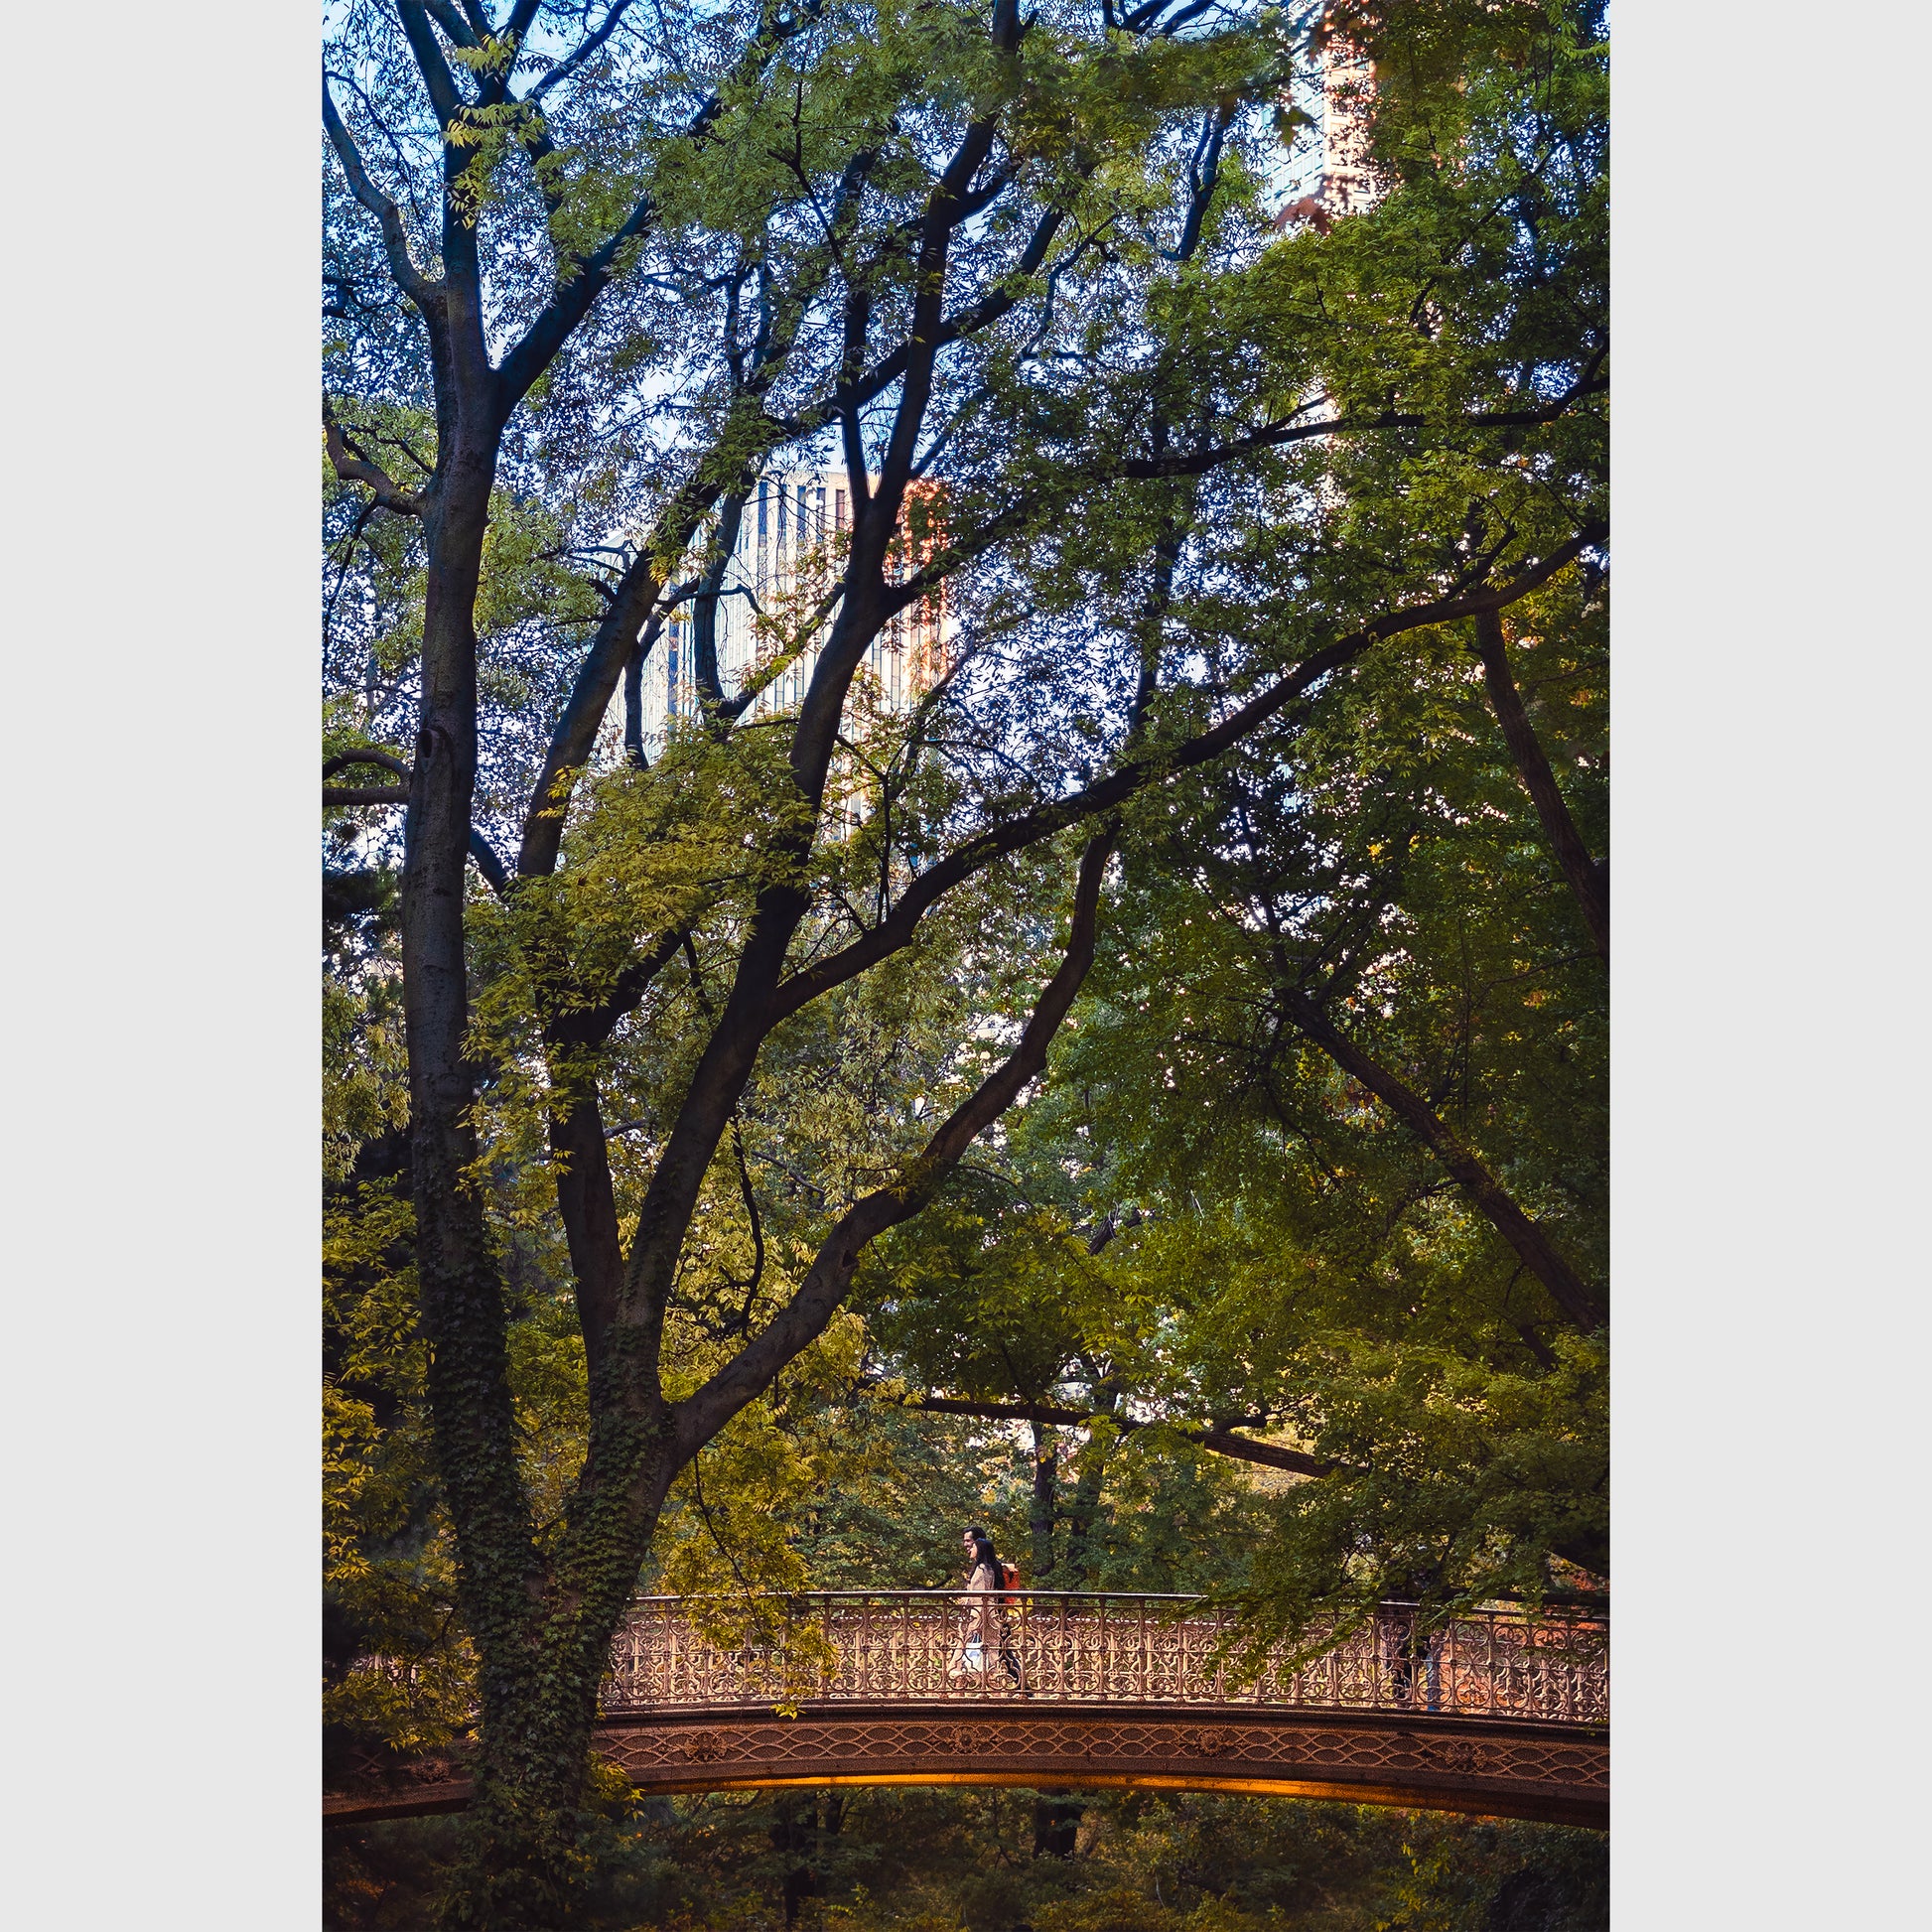 Central Park Glow - Vannopics, Day, New York, Still Life, Vertical